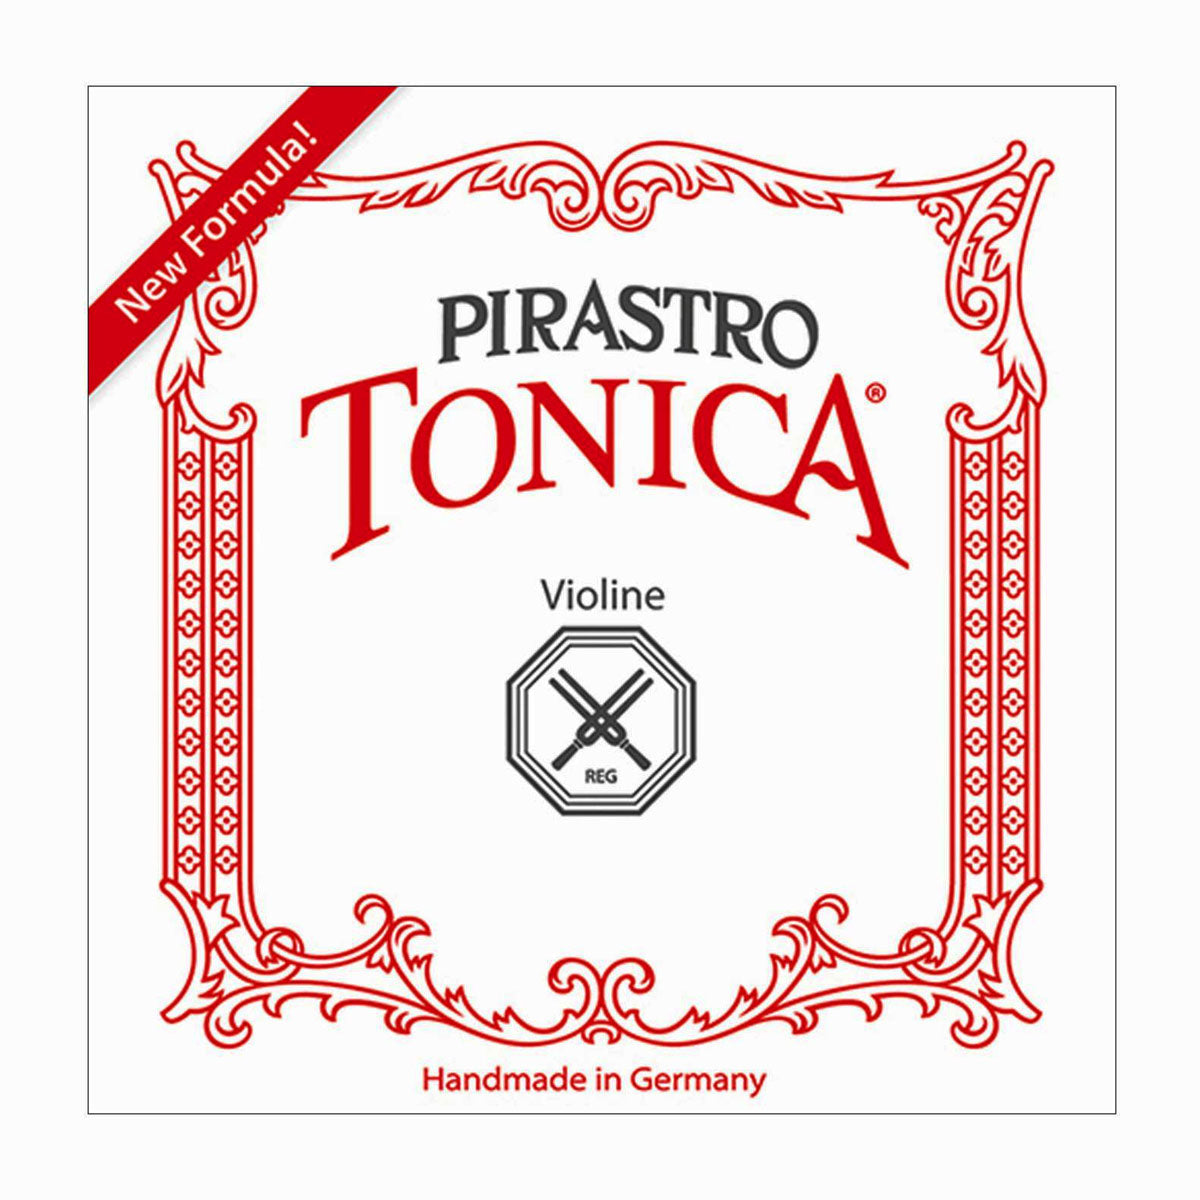 Tonica Violin Strings, Germany, full size, 4/4, 3/4, 1/2, 1/4, 1/8, 1/16, 1/32, hand-picked and inspected by Violins and such, with TEO musical Instruments, London Ontario Canada